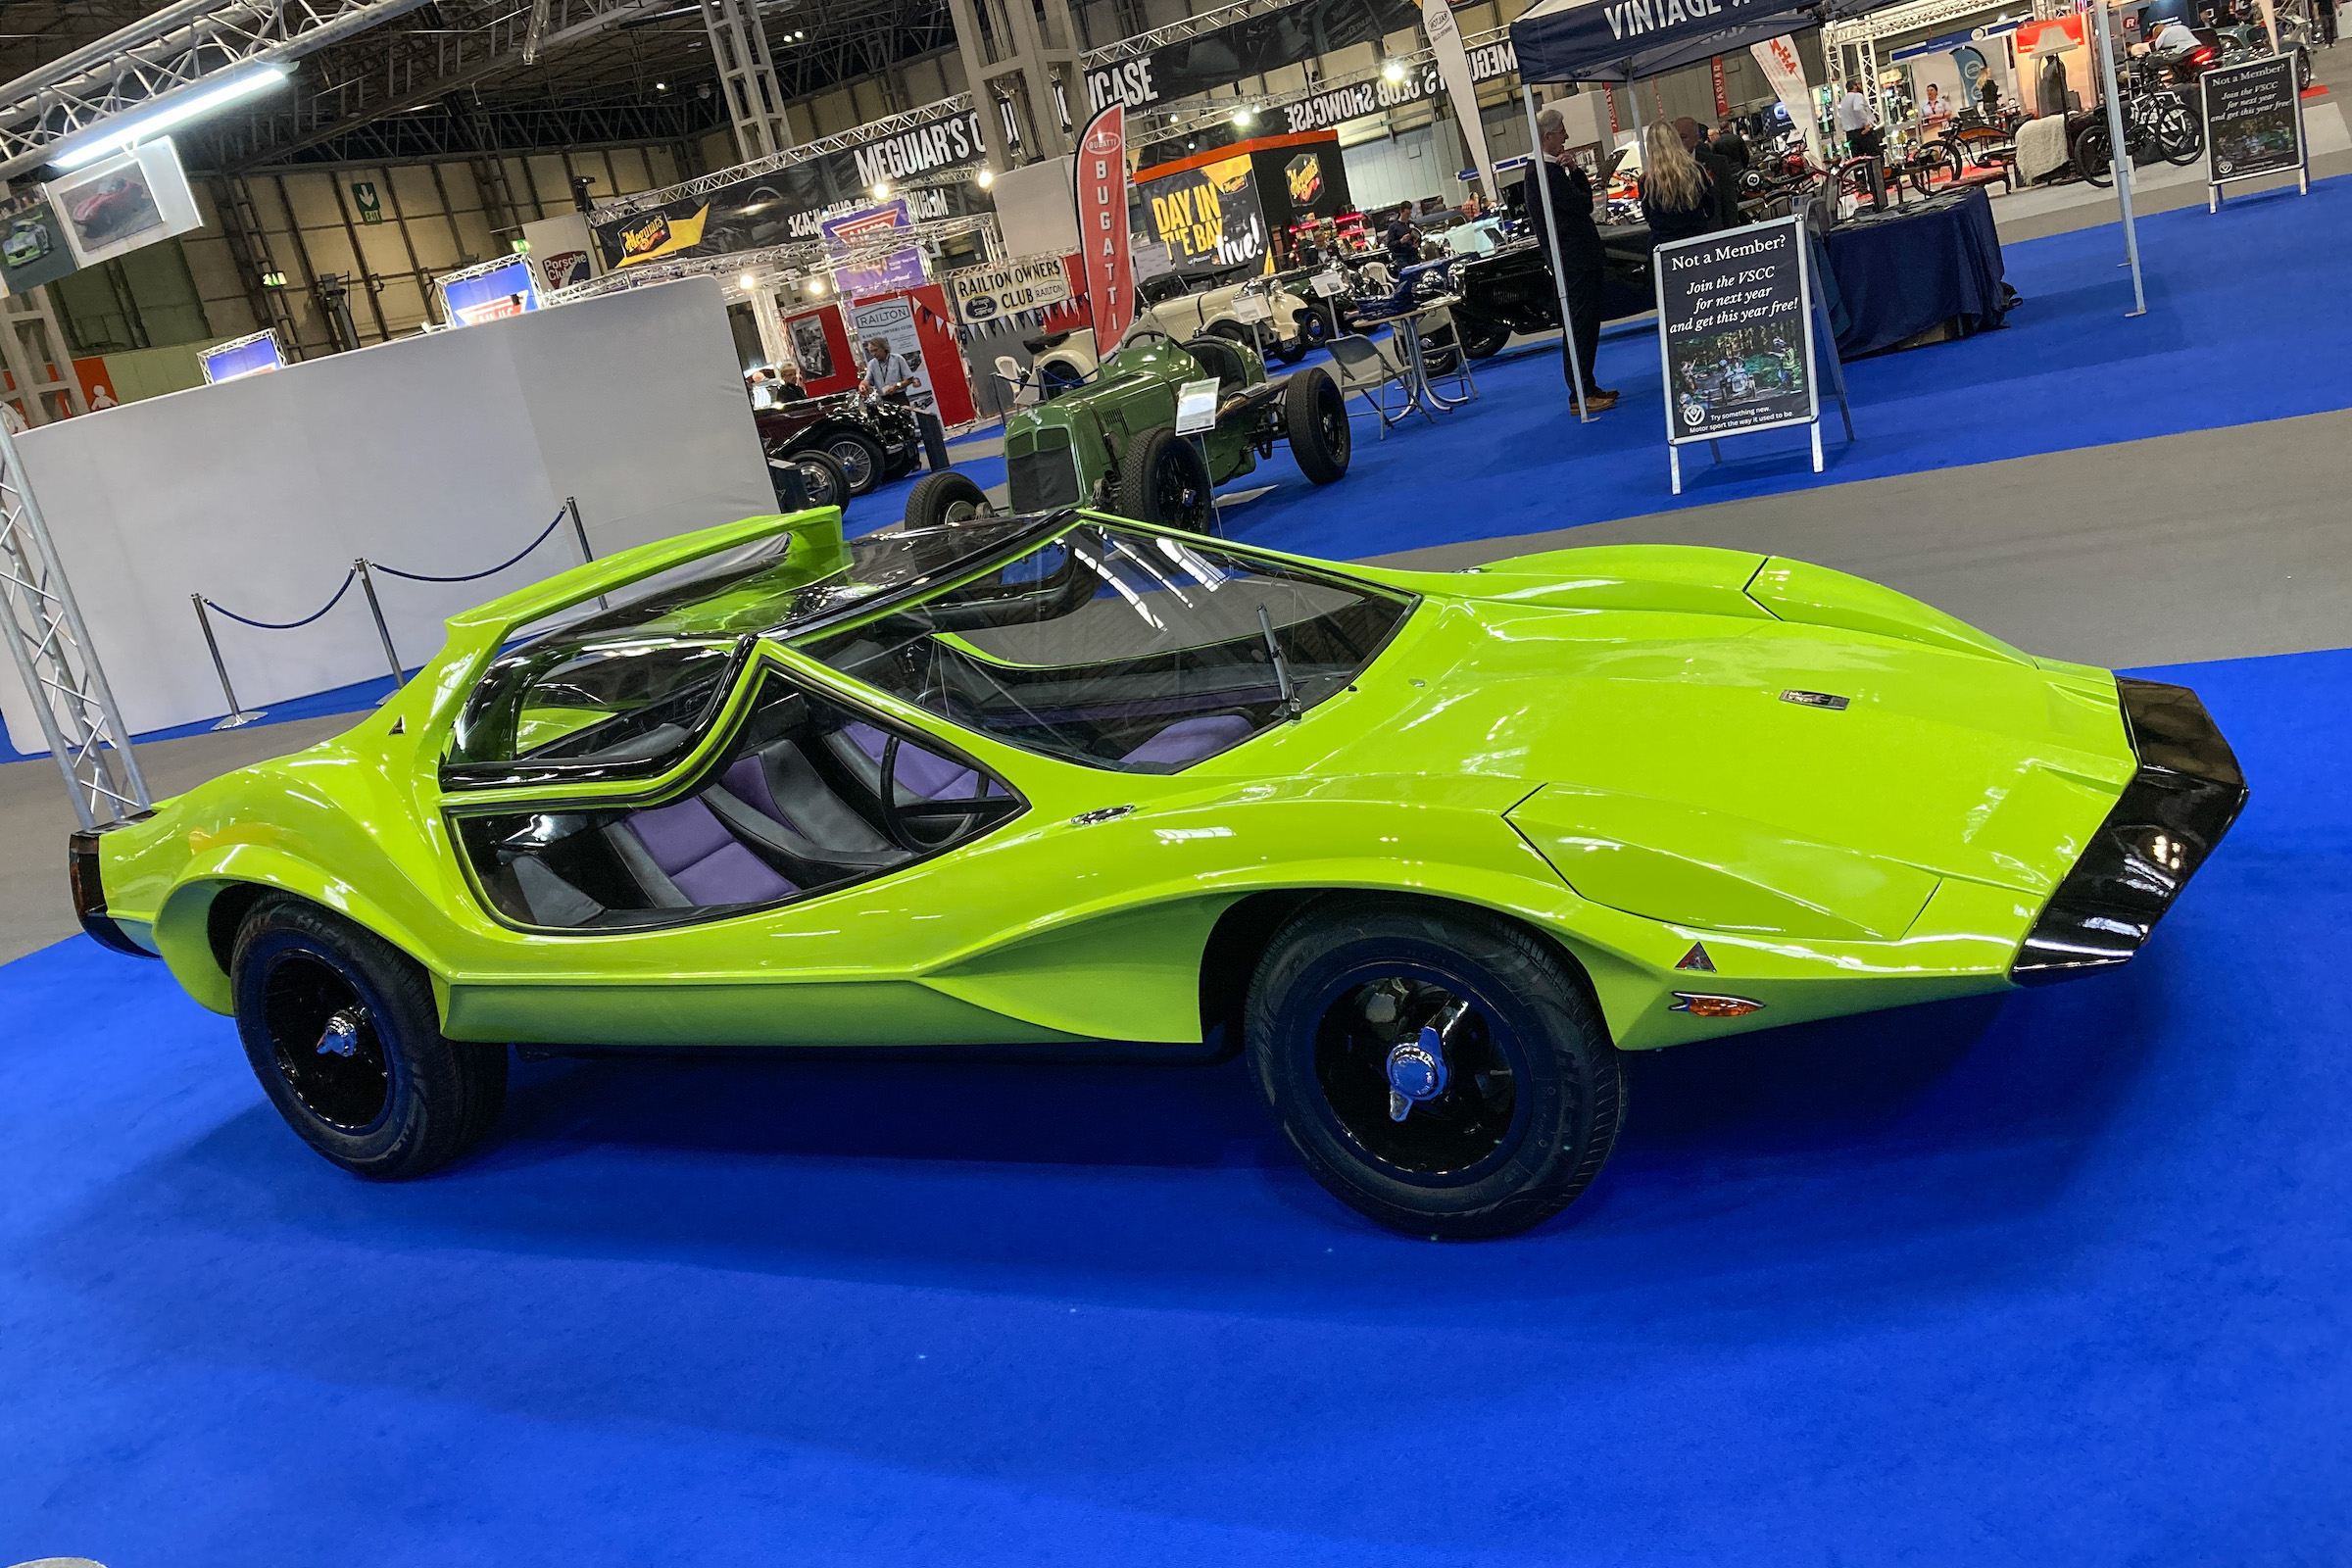 Acid green acid trip: The Adams Probe 2001 took kit car style to the extreme